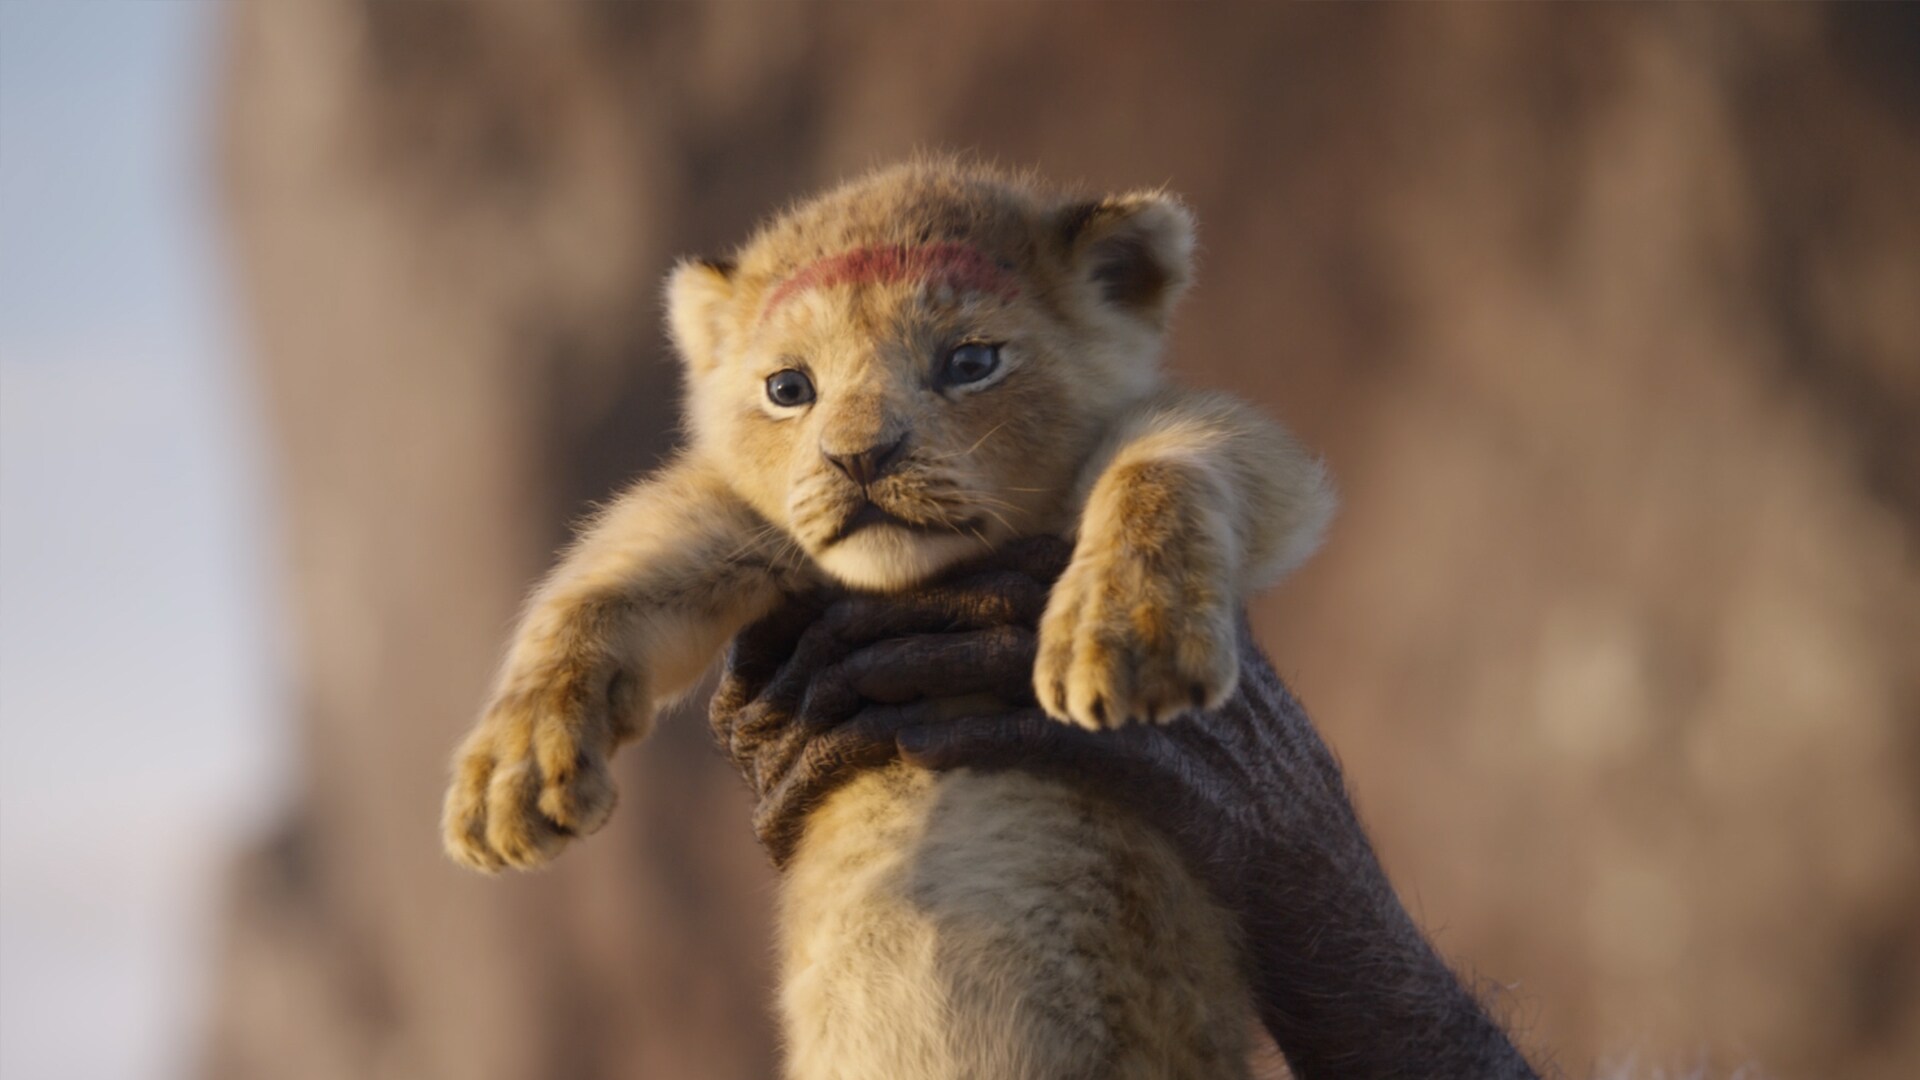 lion king 1 full movie download in english